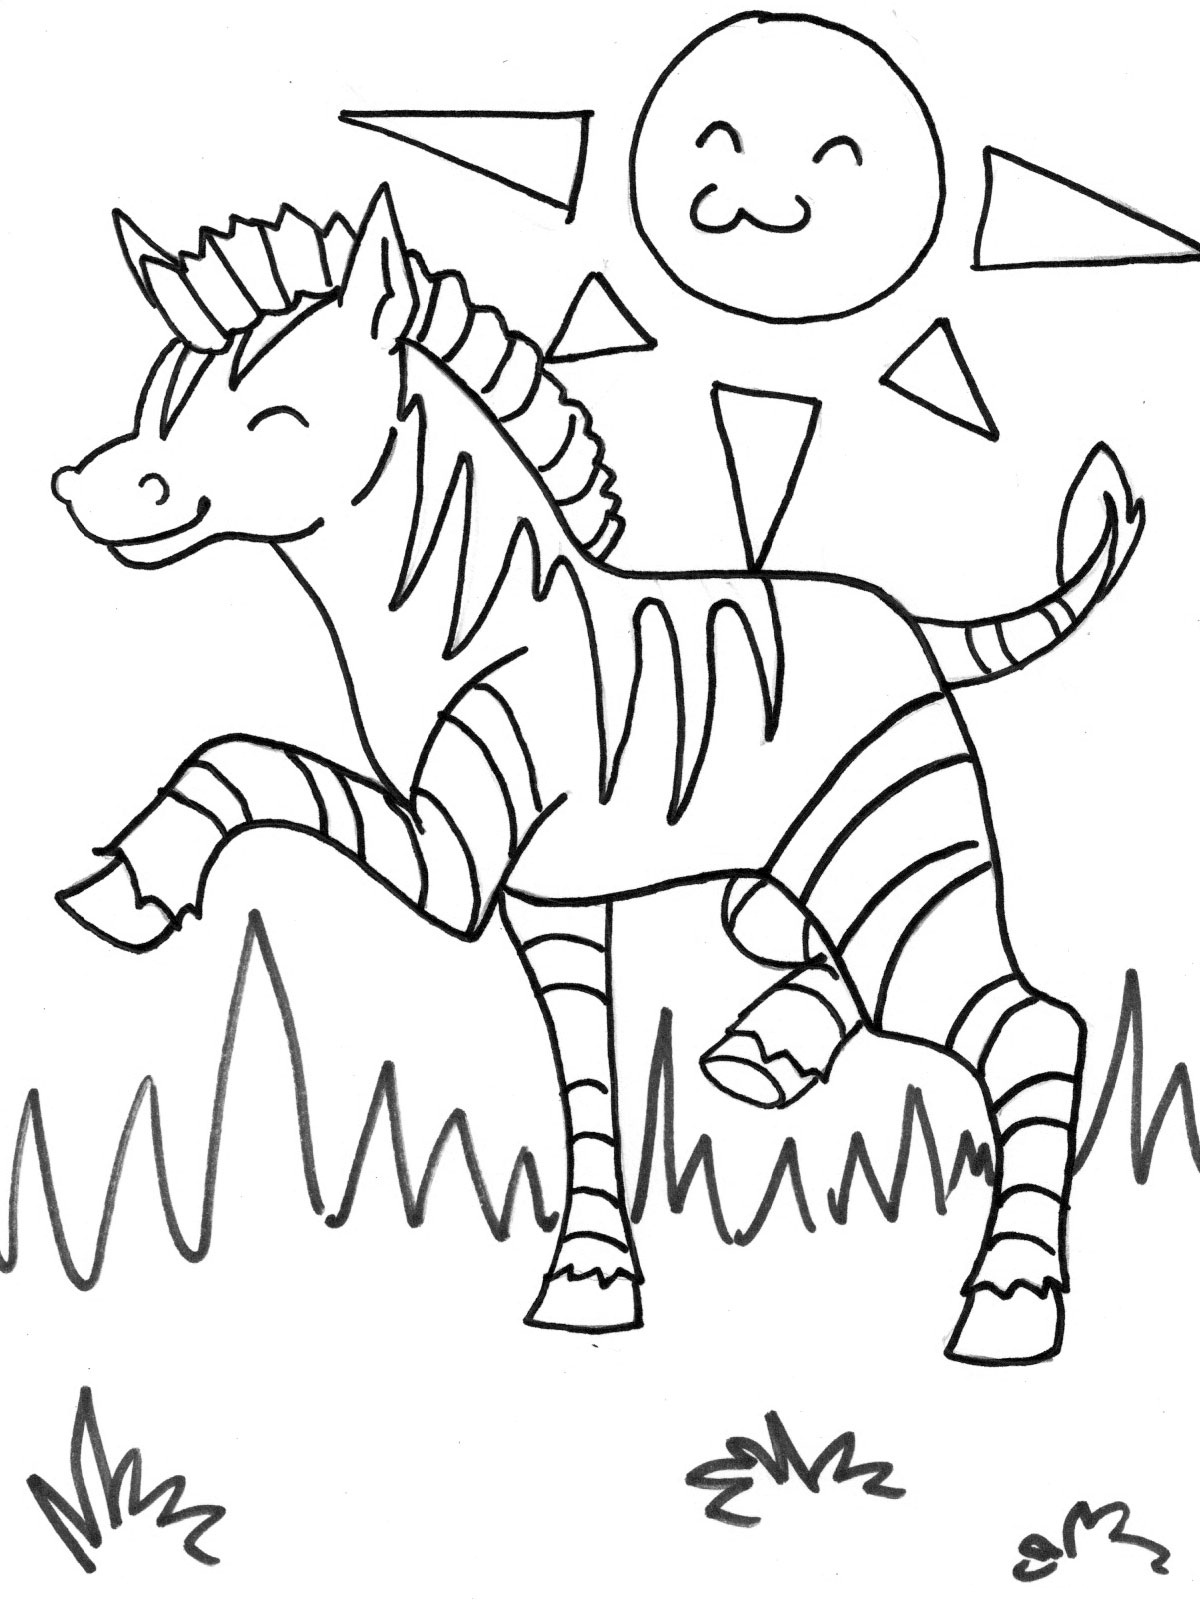 Free Printable Zebra Coloring Pages For Kids - Animal Place